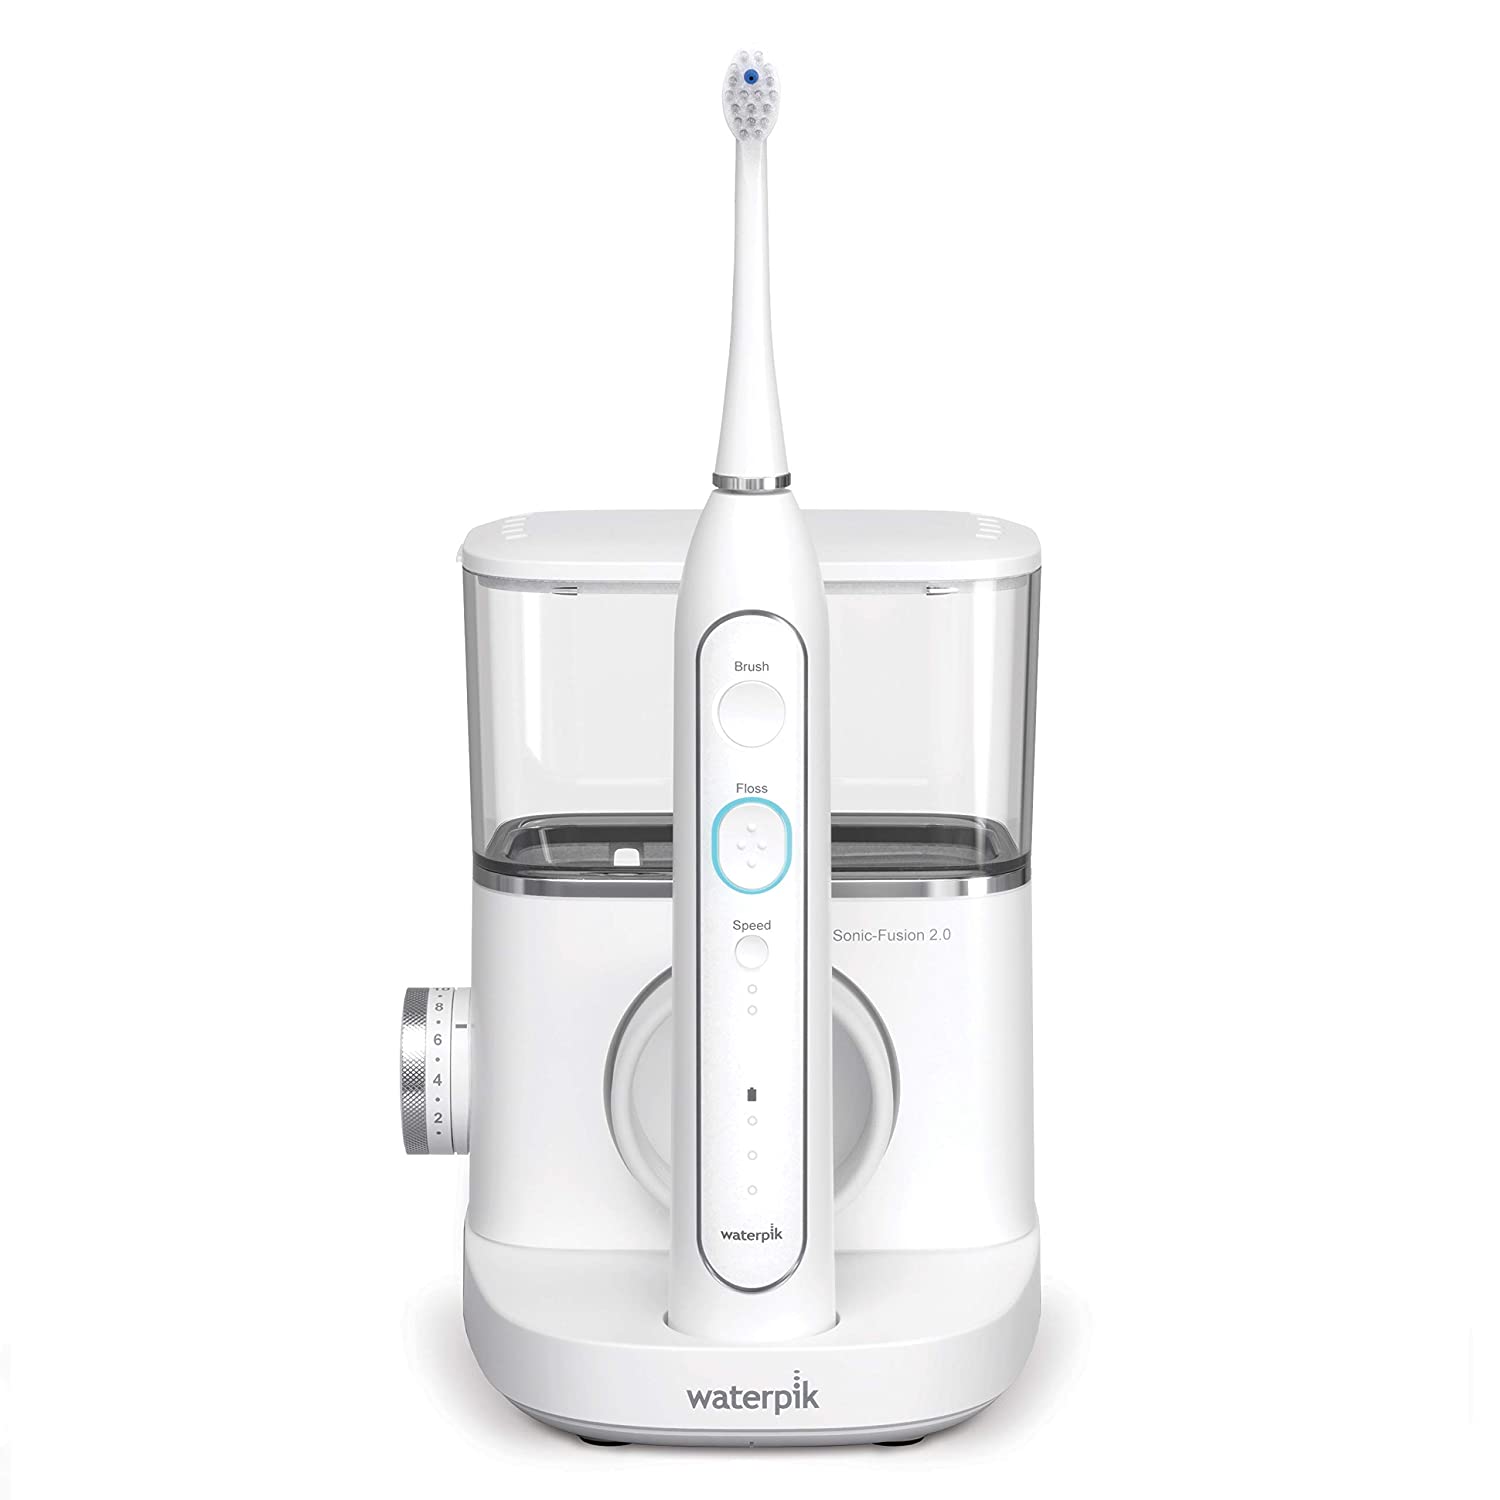 Waterpik Sonic-Fusion 2.0 Professional Flossing Toothbrush, Electric Toothbrush and Water Flosser Combo In One, White - image 1 of 11